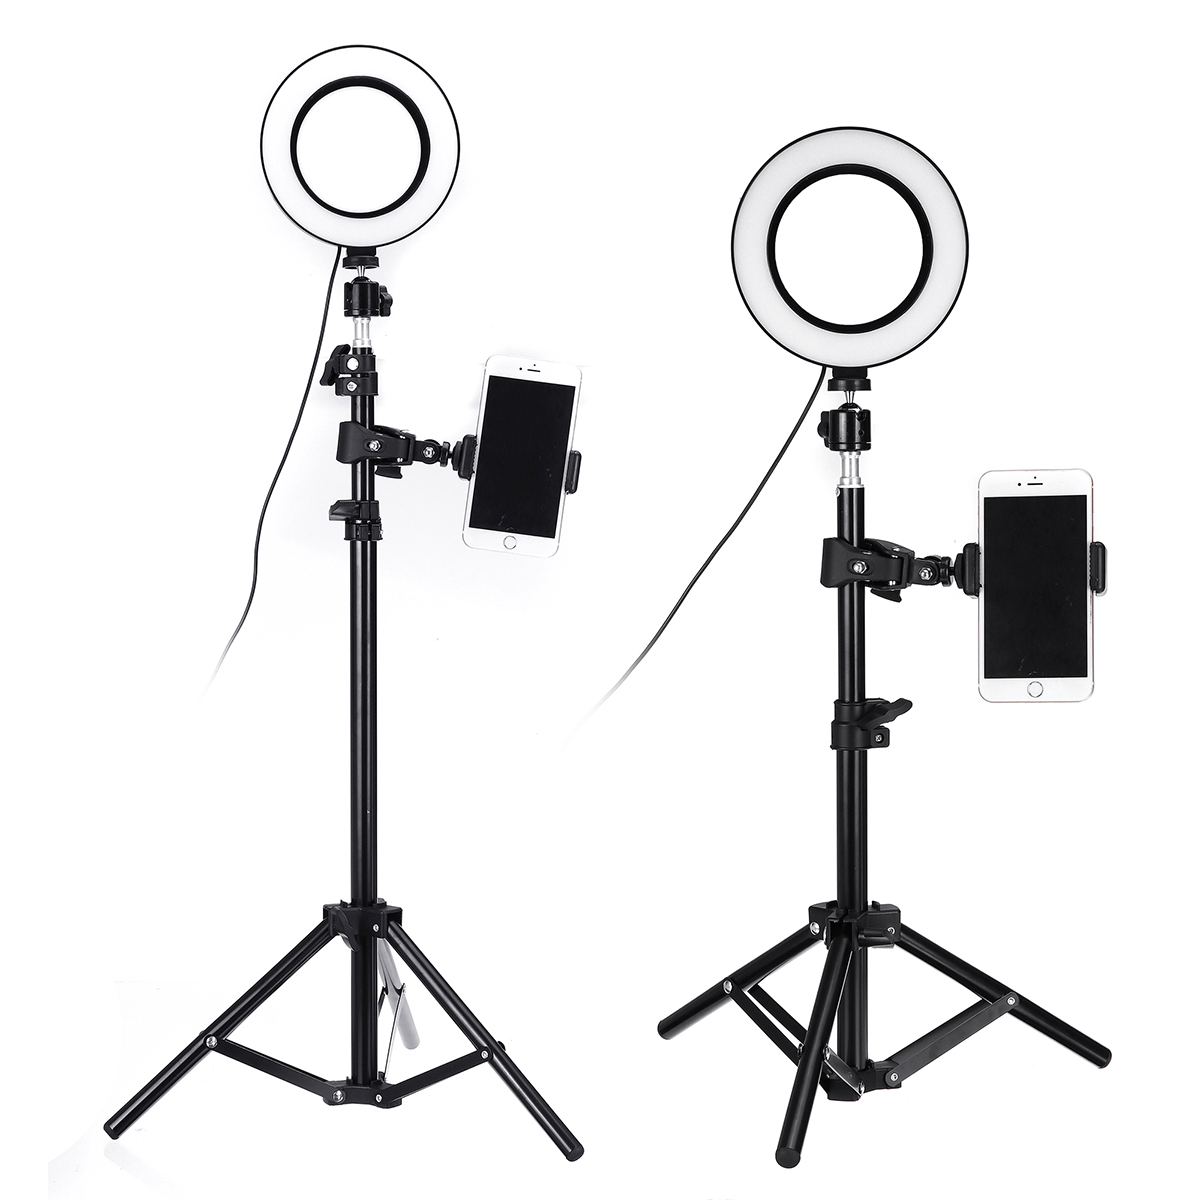 Find 6 Inch Ring LED Live Light Photographic Lamp with Bracket for Sale on Gipsybee.com with cryptocurrencies